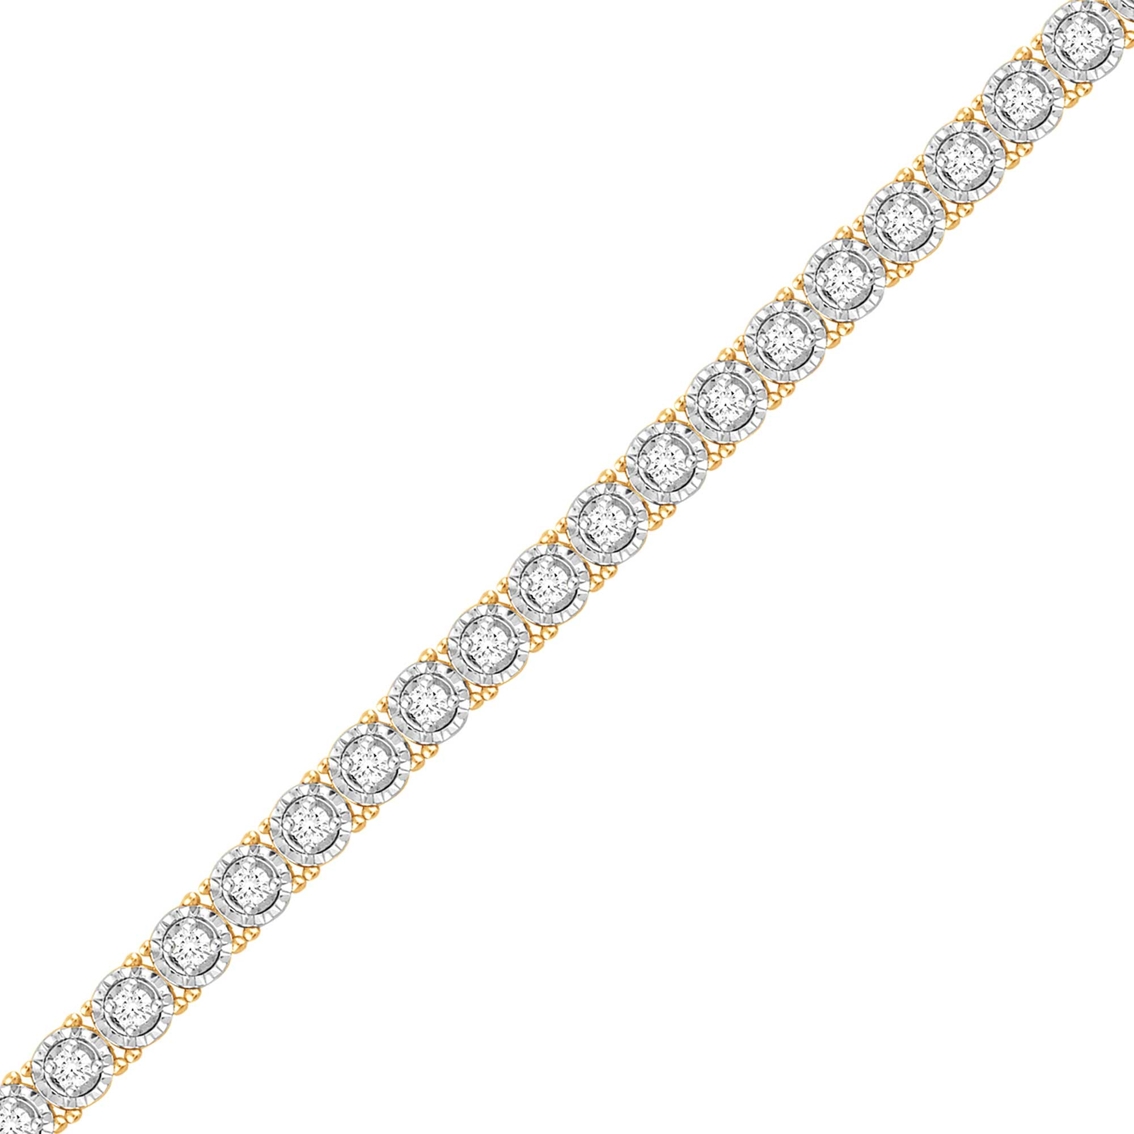 Gold Over Sterling Silver 1 CTW Diamond Tennis Bracelet - Image 2 of 3